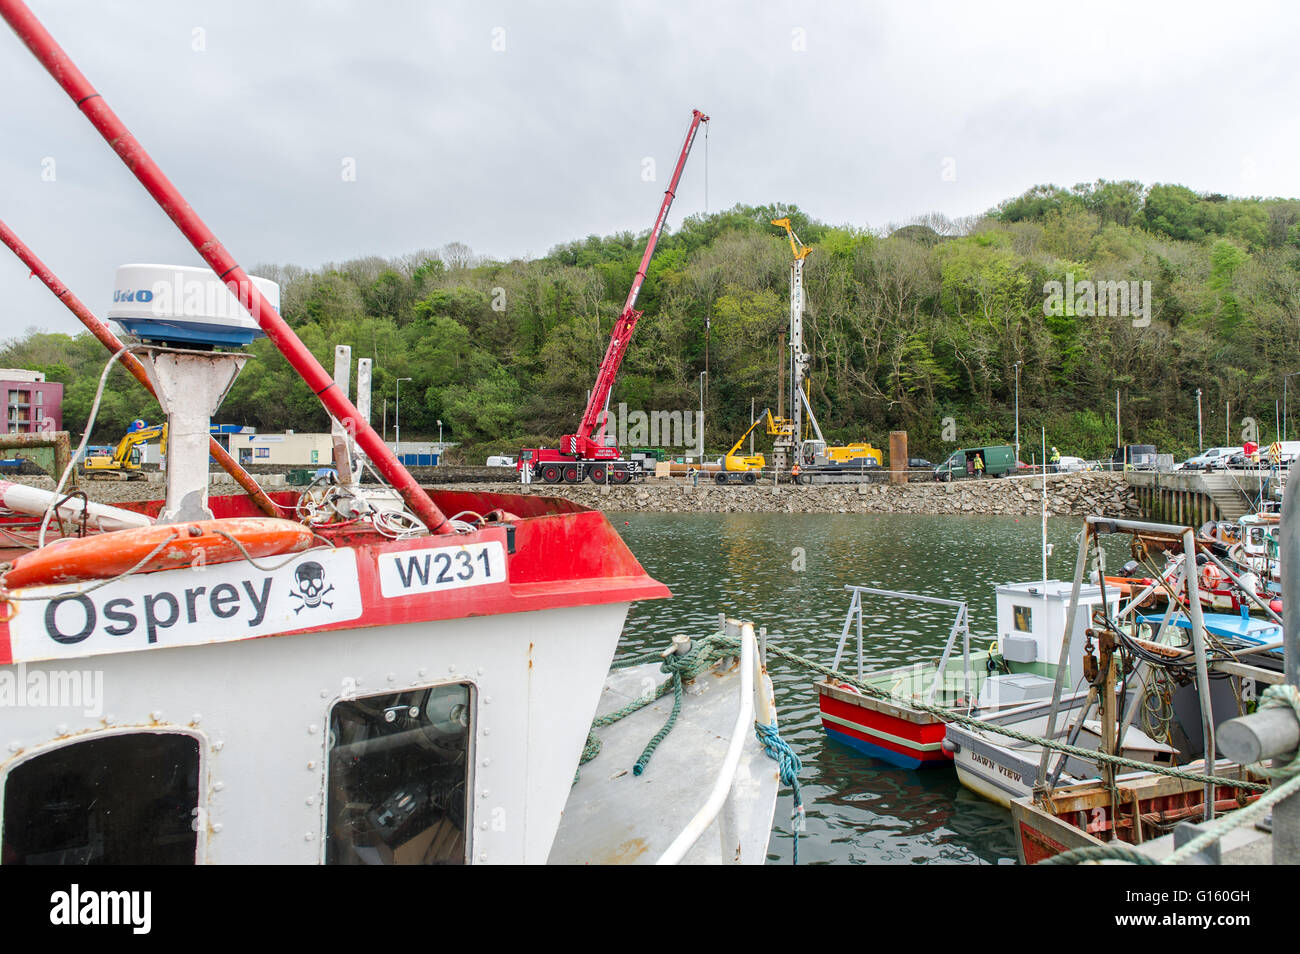 Bantry, Ireland. 9th May, 2016. Works are continuing on the €8.5 million first phase of the Bantry Inner Harbour Development. By the time the project is finished, there will be a 20 berth Marina (quayside pontoons) and the harbour will have been dregded to a depth of 4 metres to allow vessels access to the inner harbour.  Additional works will include the widening and extending of the Town Pier, 4,000m2 of reclaimed landscaped amenity area and the construction of a 60m long floating breakwater pontoon.  Credit:  AG News/Alamy Live News Stock Photo